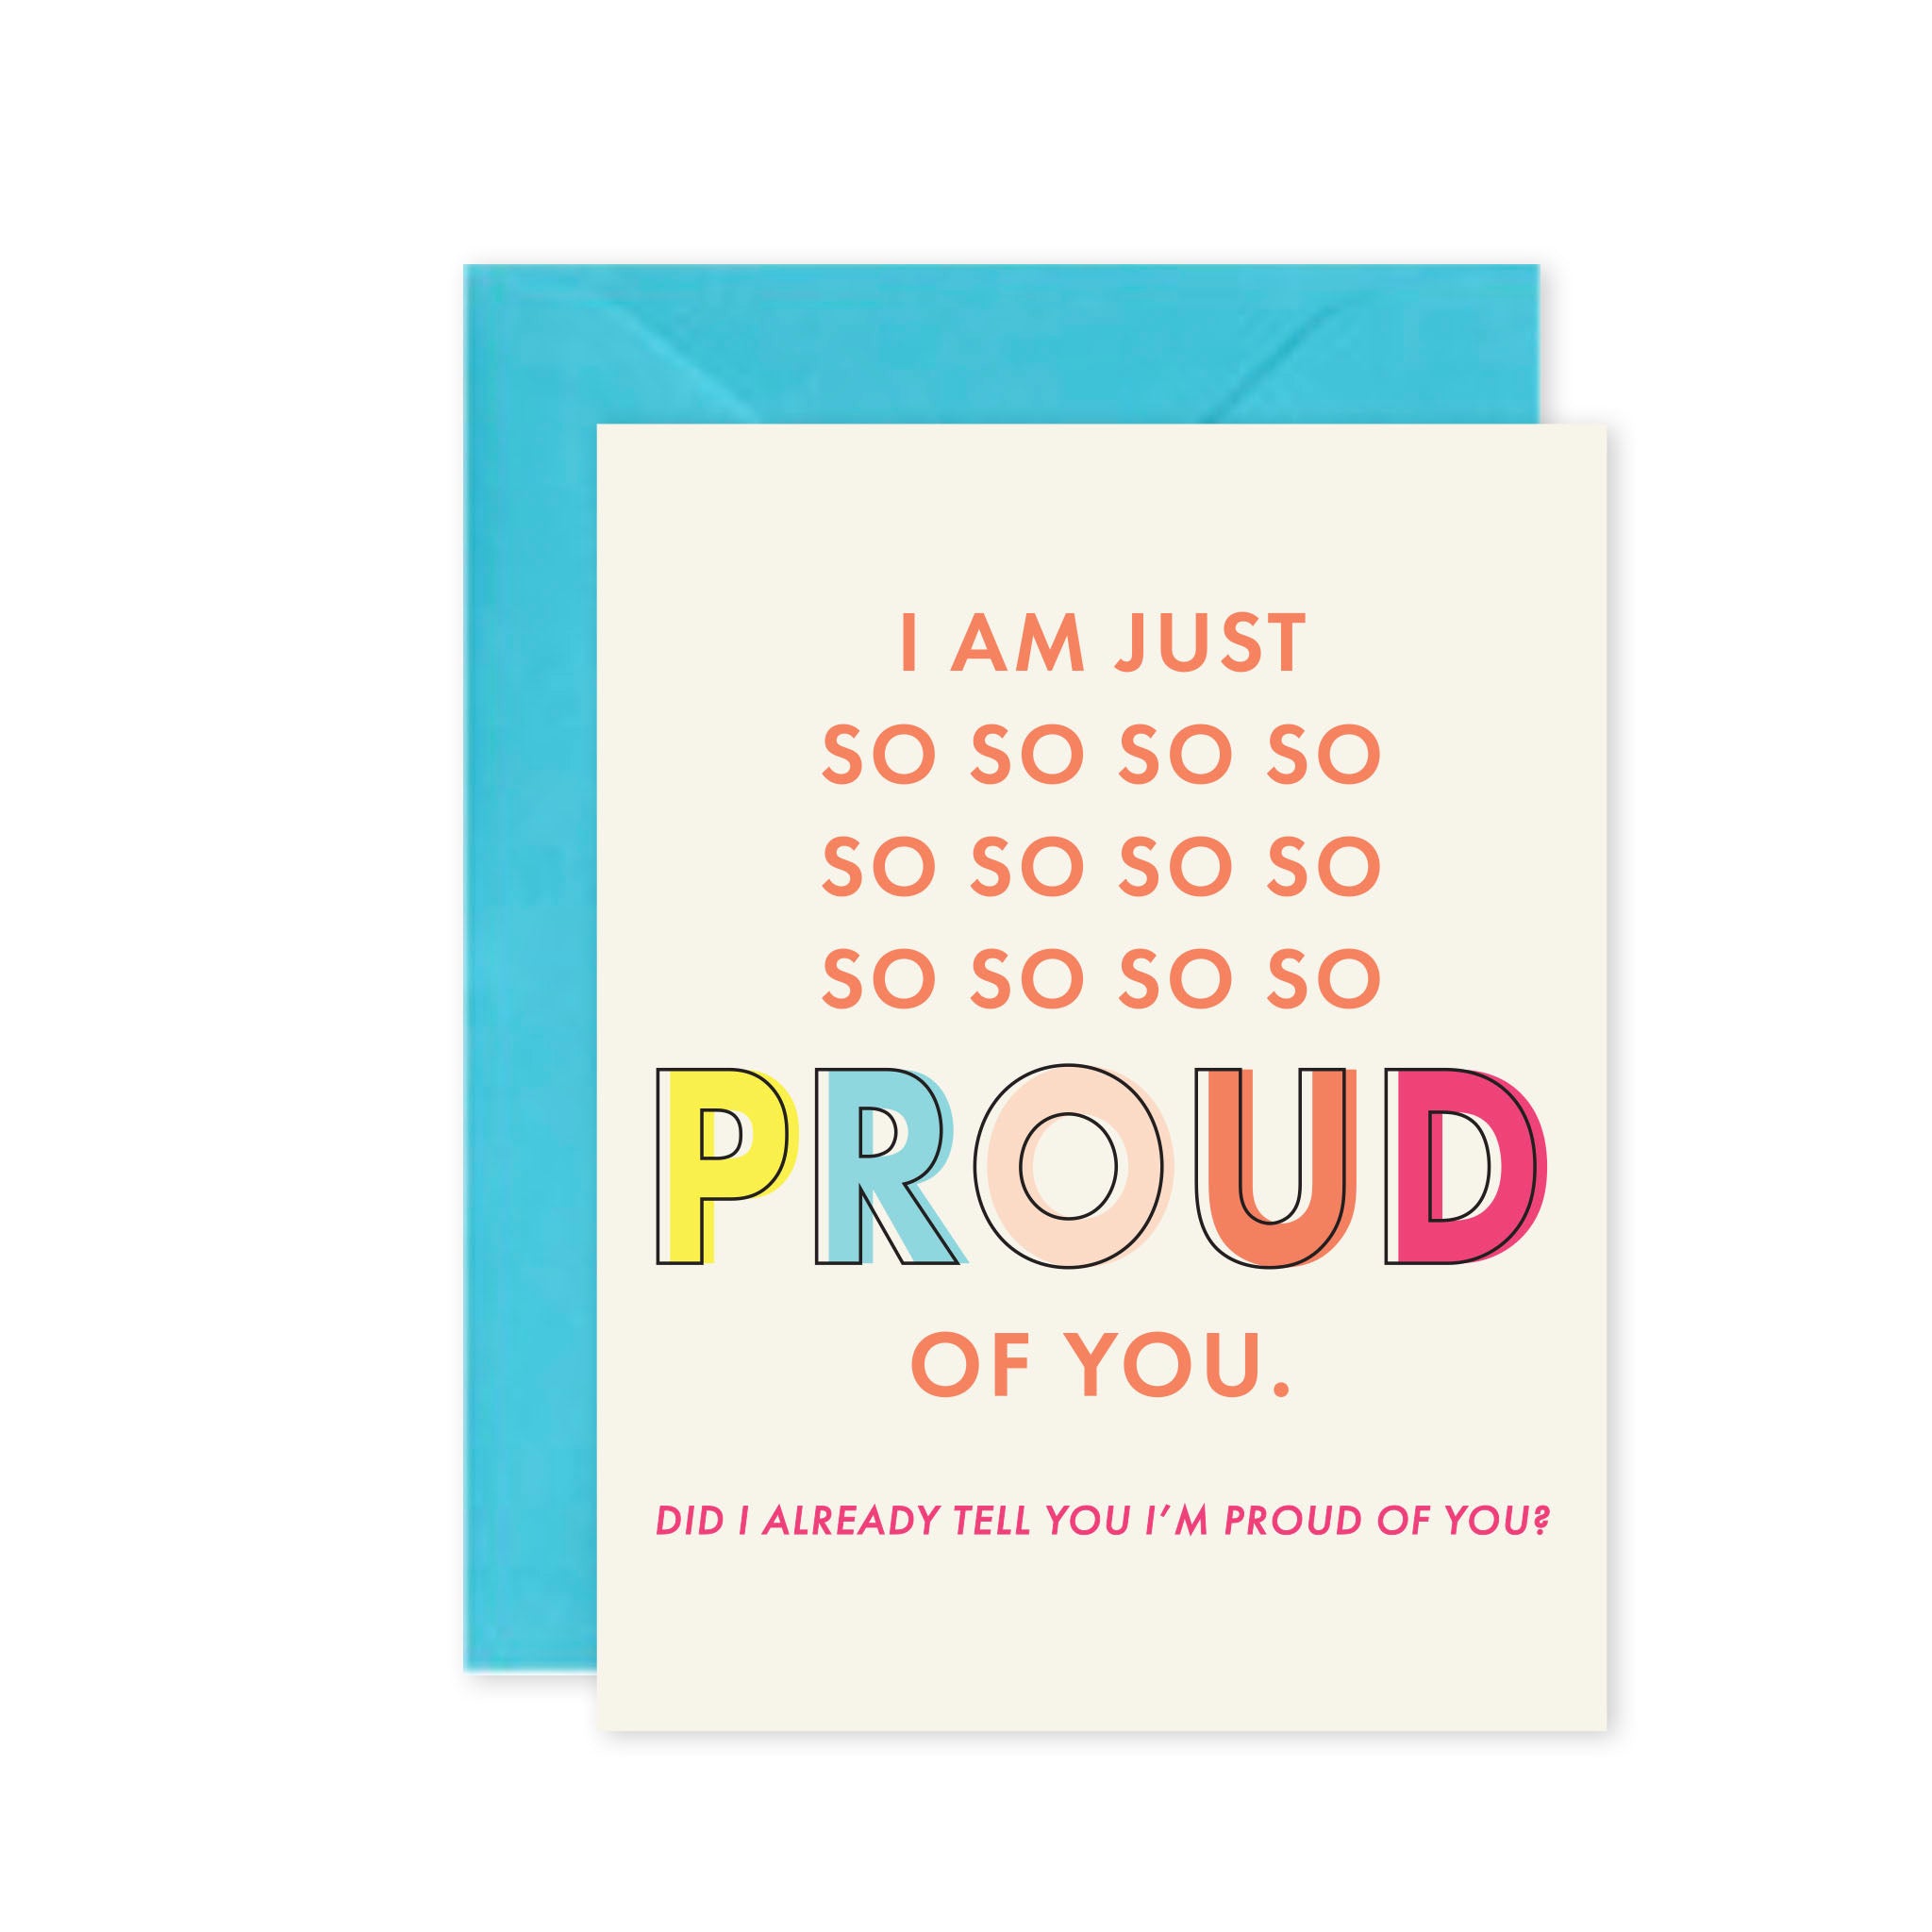 So So Proud Of You Greeting Card Cleerely Stated